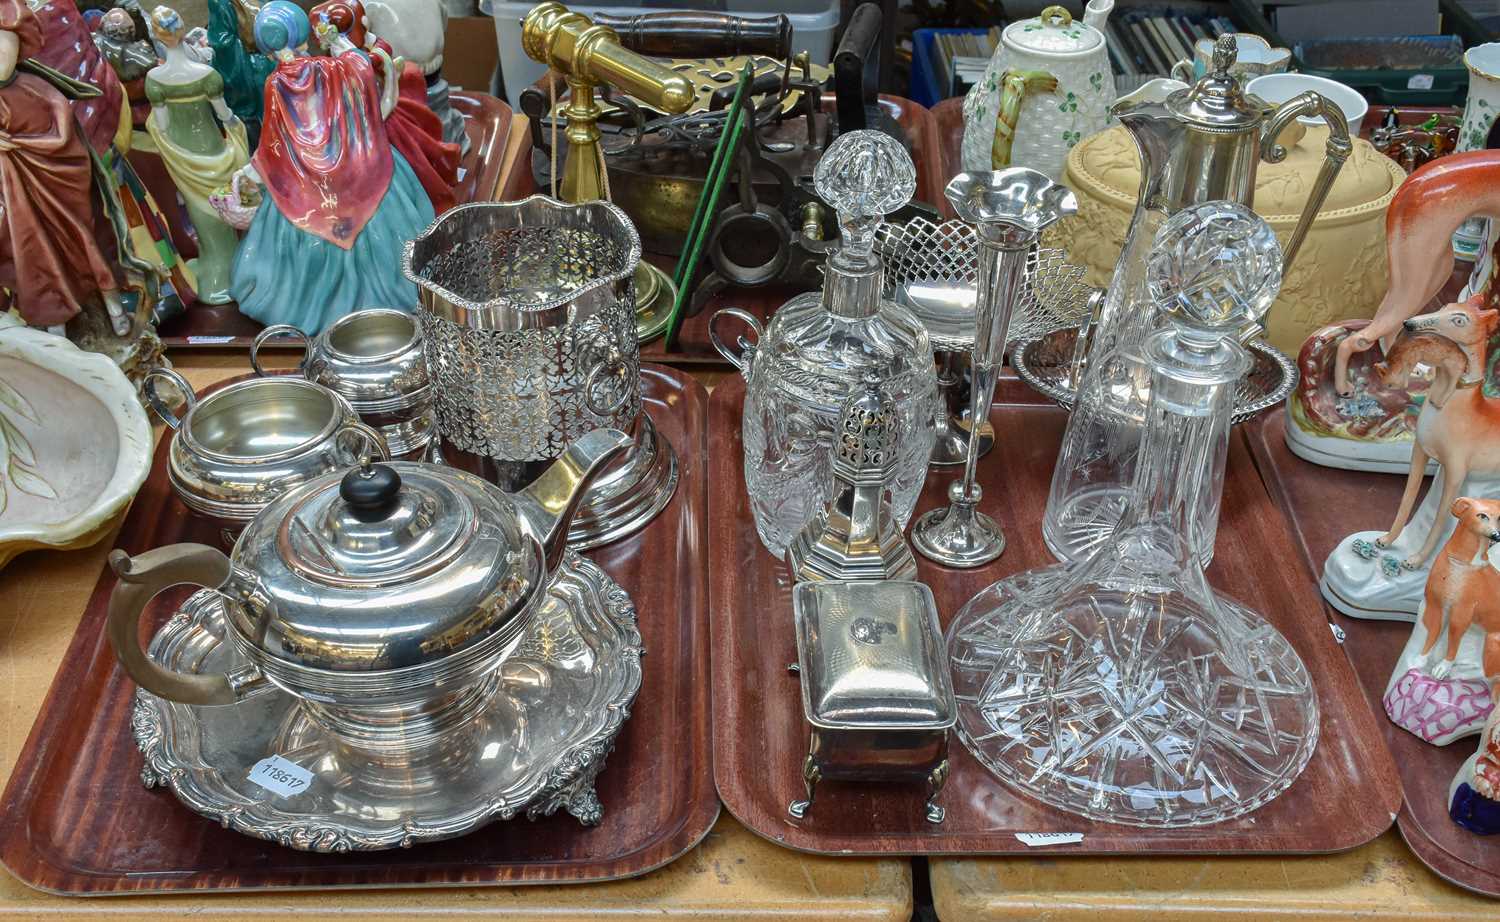 A Silver Mounted Cut Glass Decanter and Silver Plated Items - Image 2 of 2